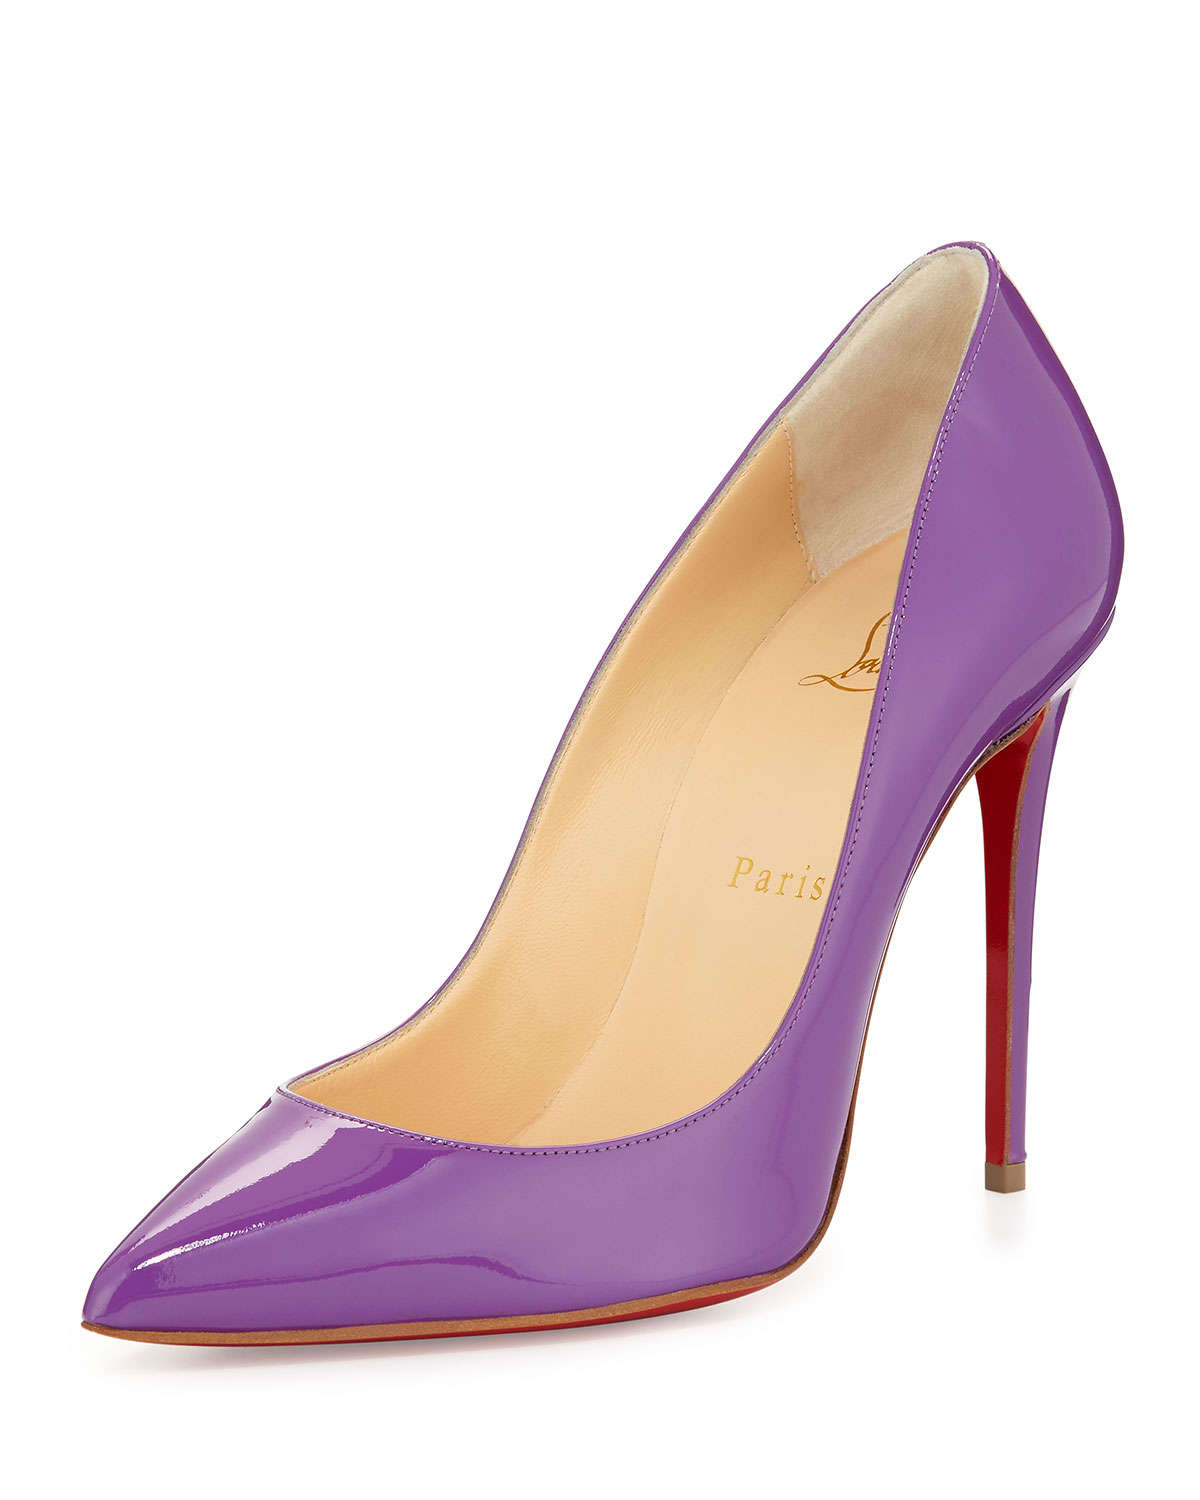 Lyst - Christian Louboutin Pigalle Follies Red Sole Pump in Purple